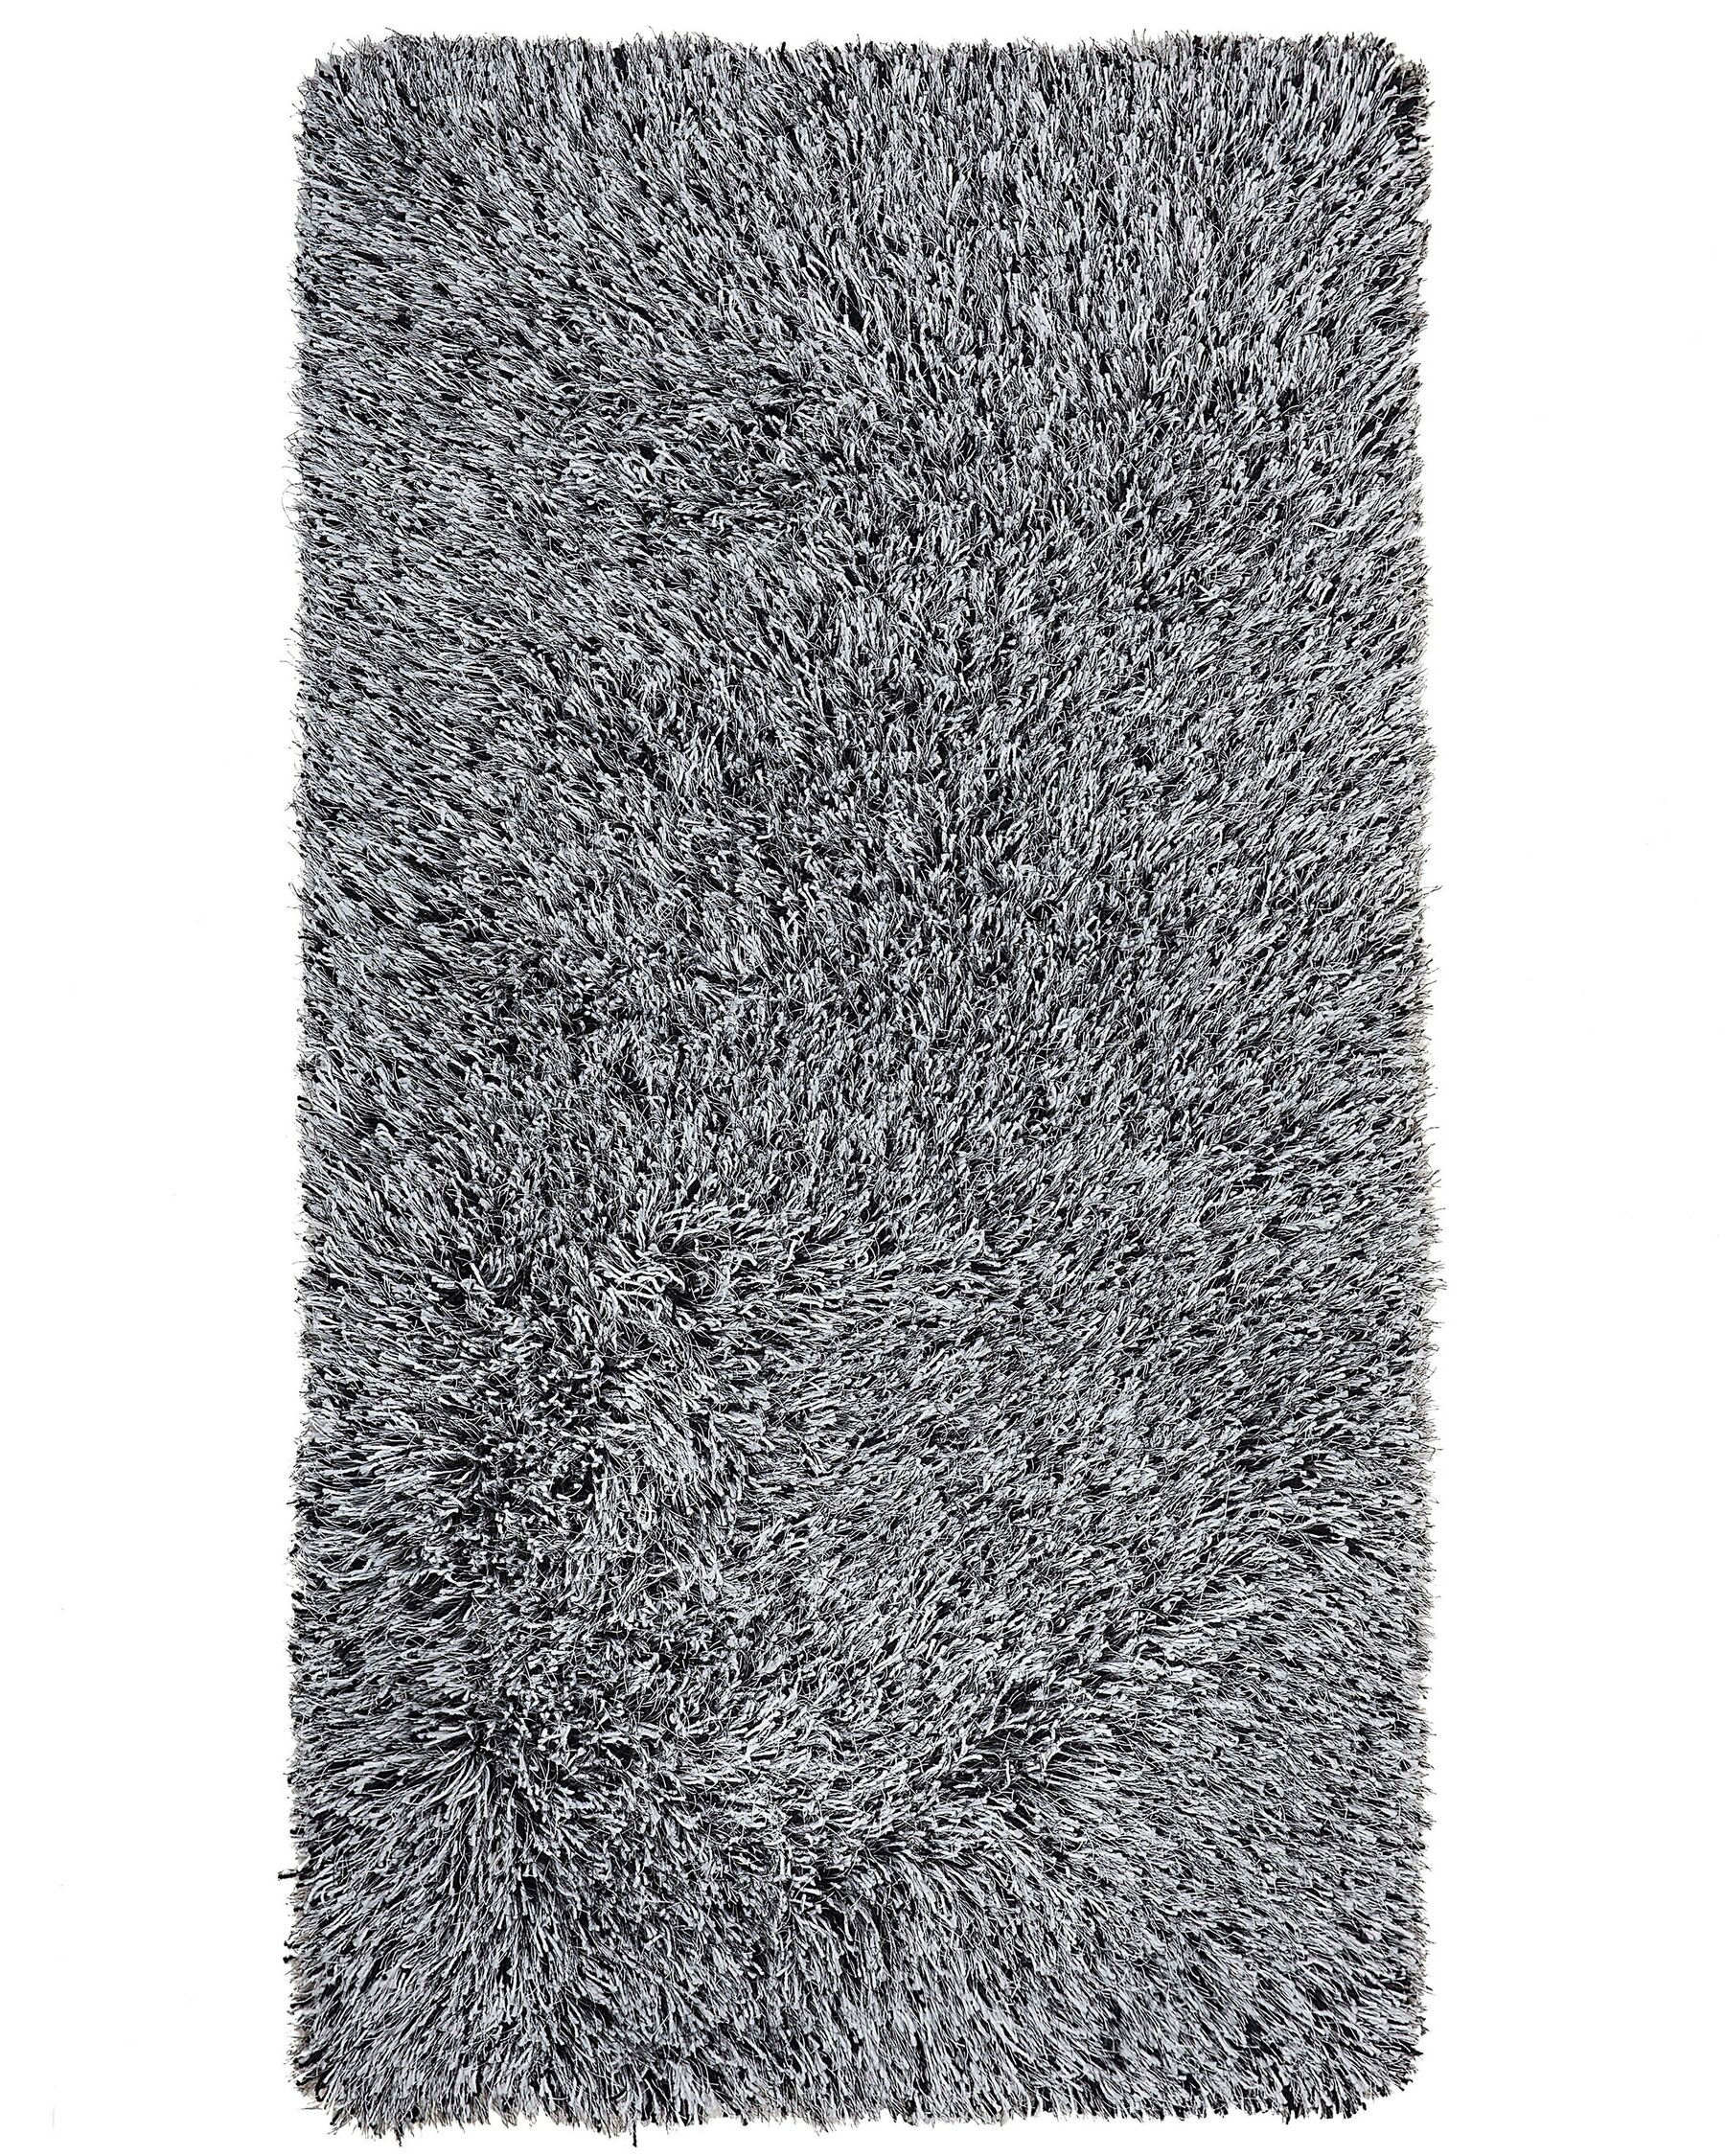 Shaggy Area Rug 80 x 150 cm Black and White CIDE_746798